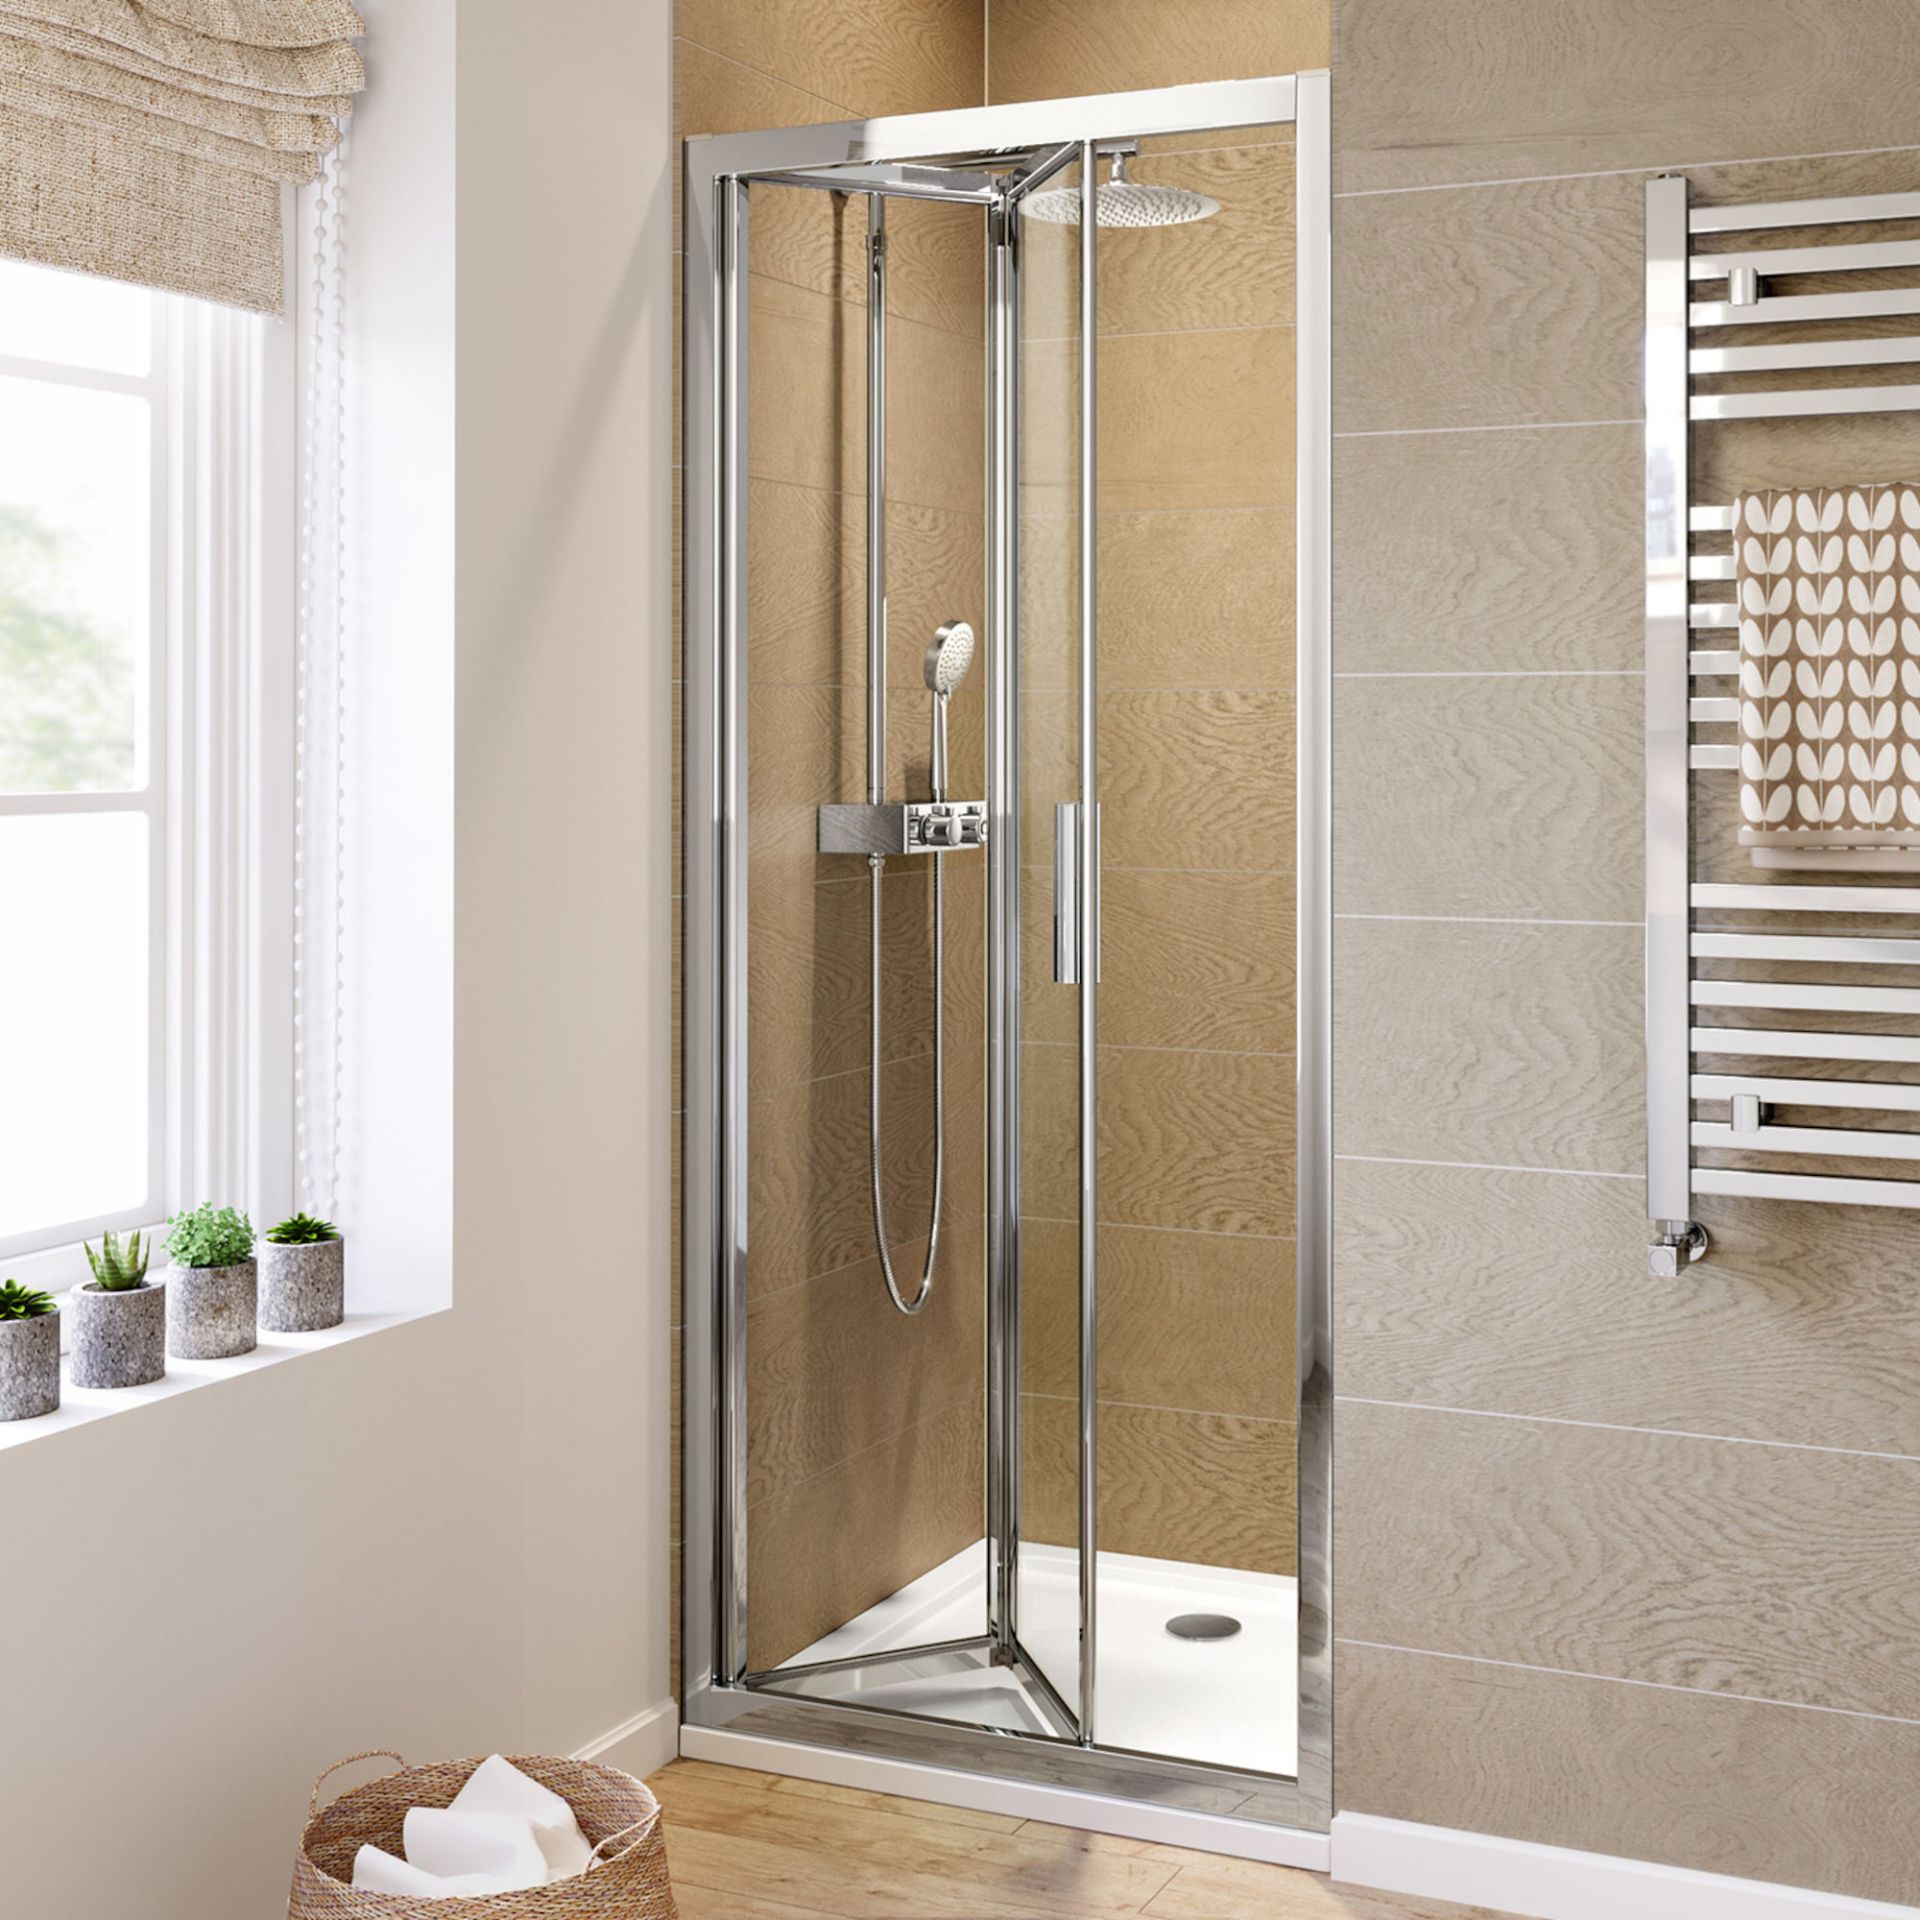 (TY118) 800mm - 6mm - Elements EasyClean Bifold Shower Door. RRP £299.99. 6mm Safety Glass -